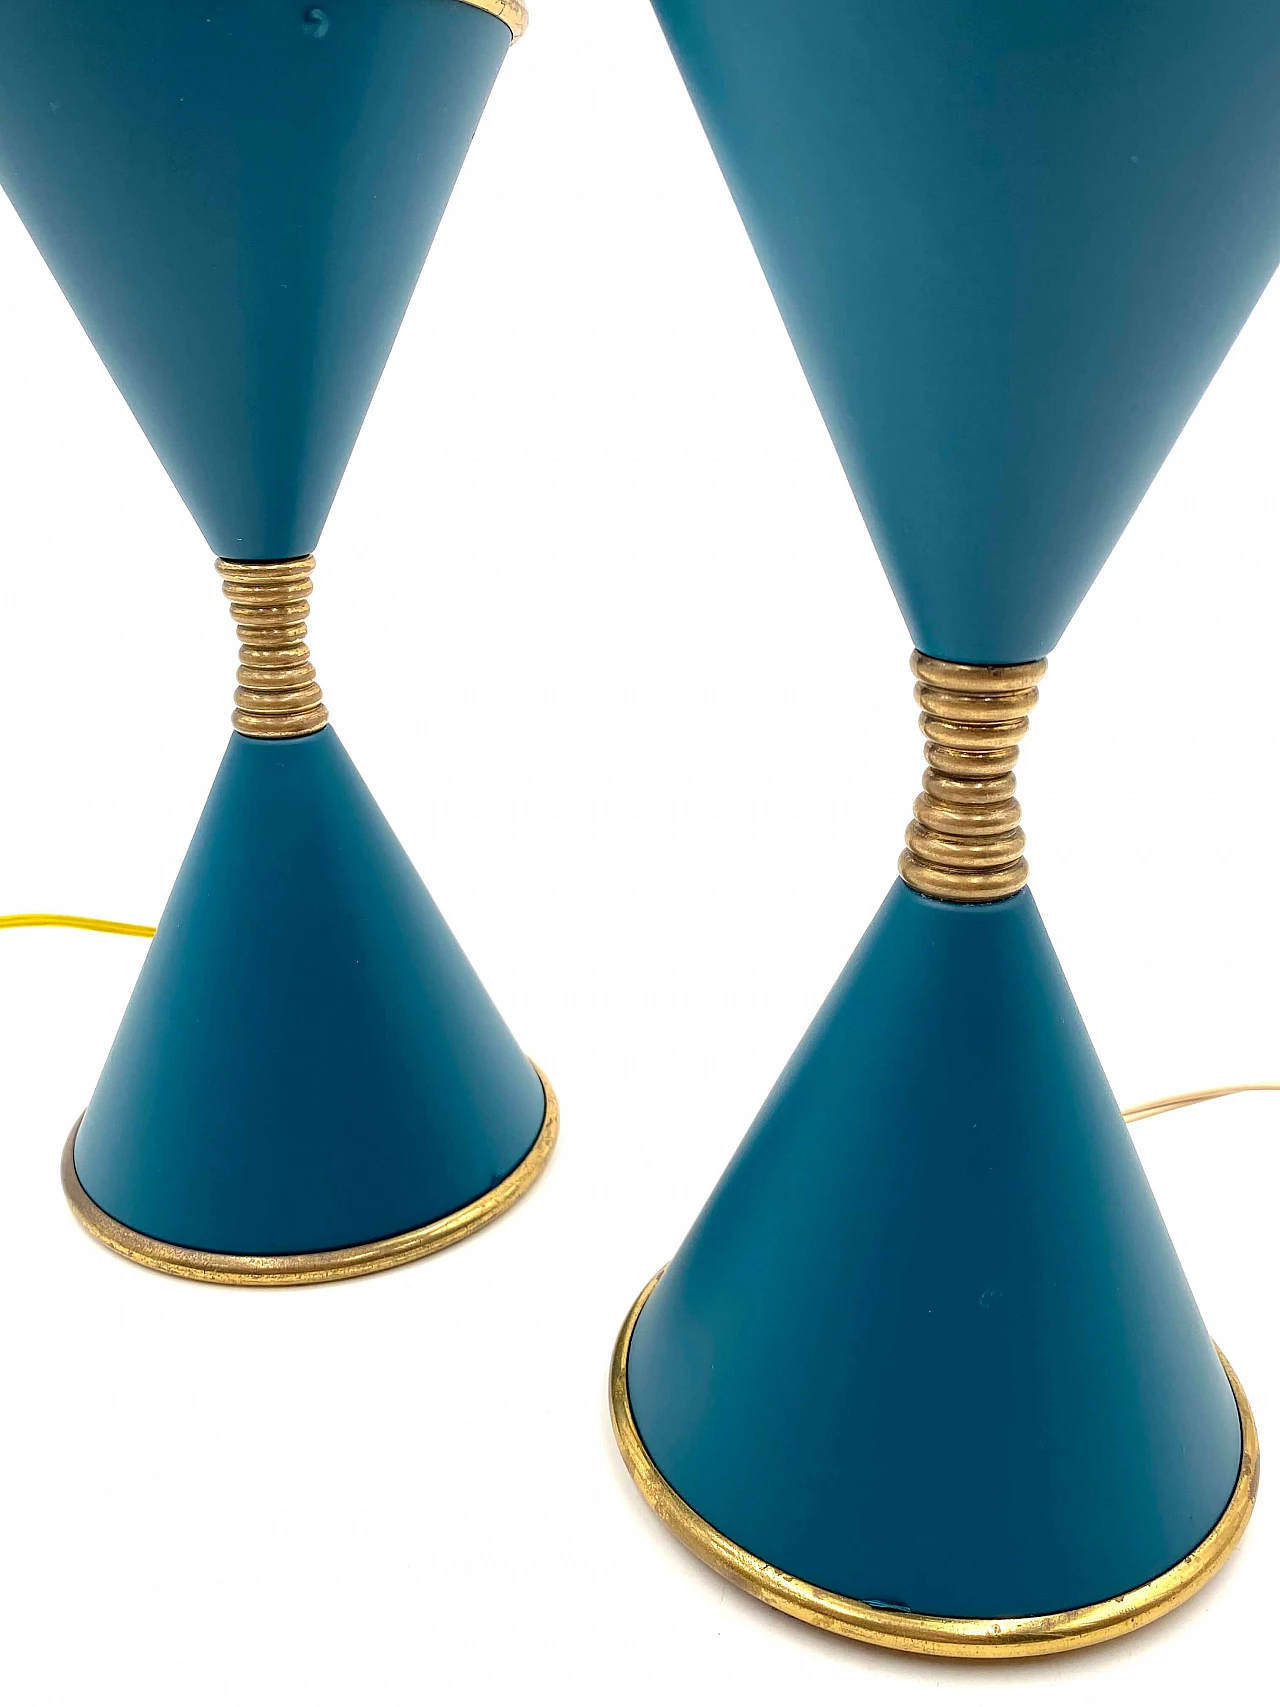 Pair of Clessidra lamps by Angelo Lelii for Arredoluce, 1960s 1201460